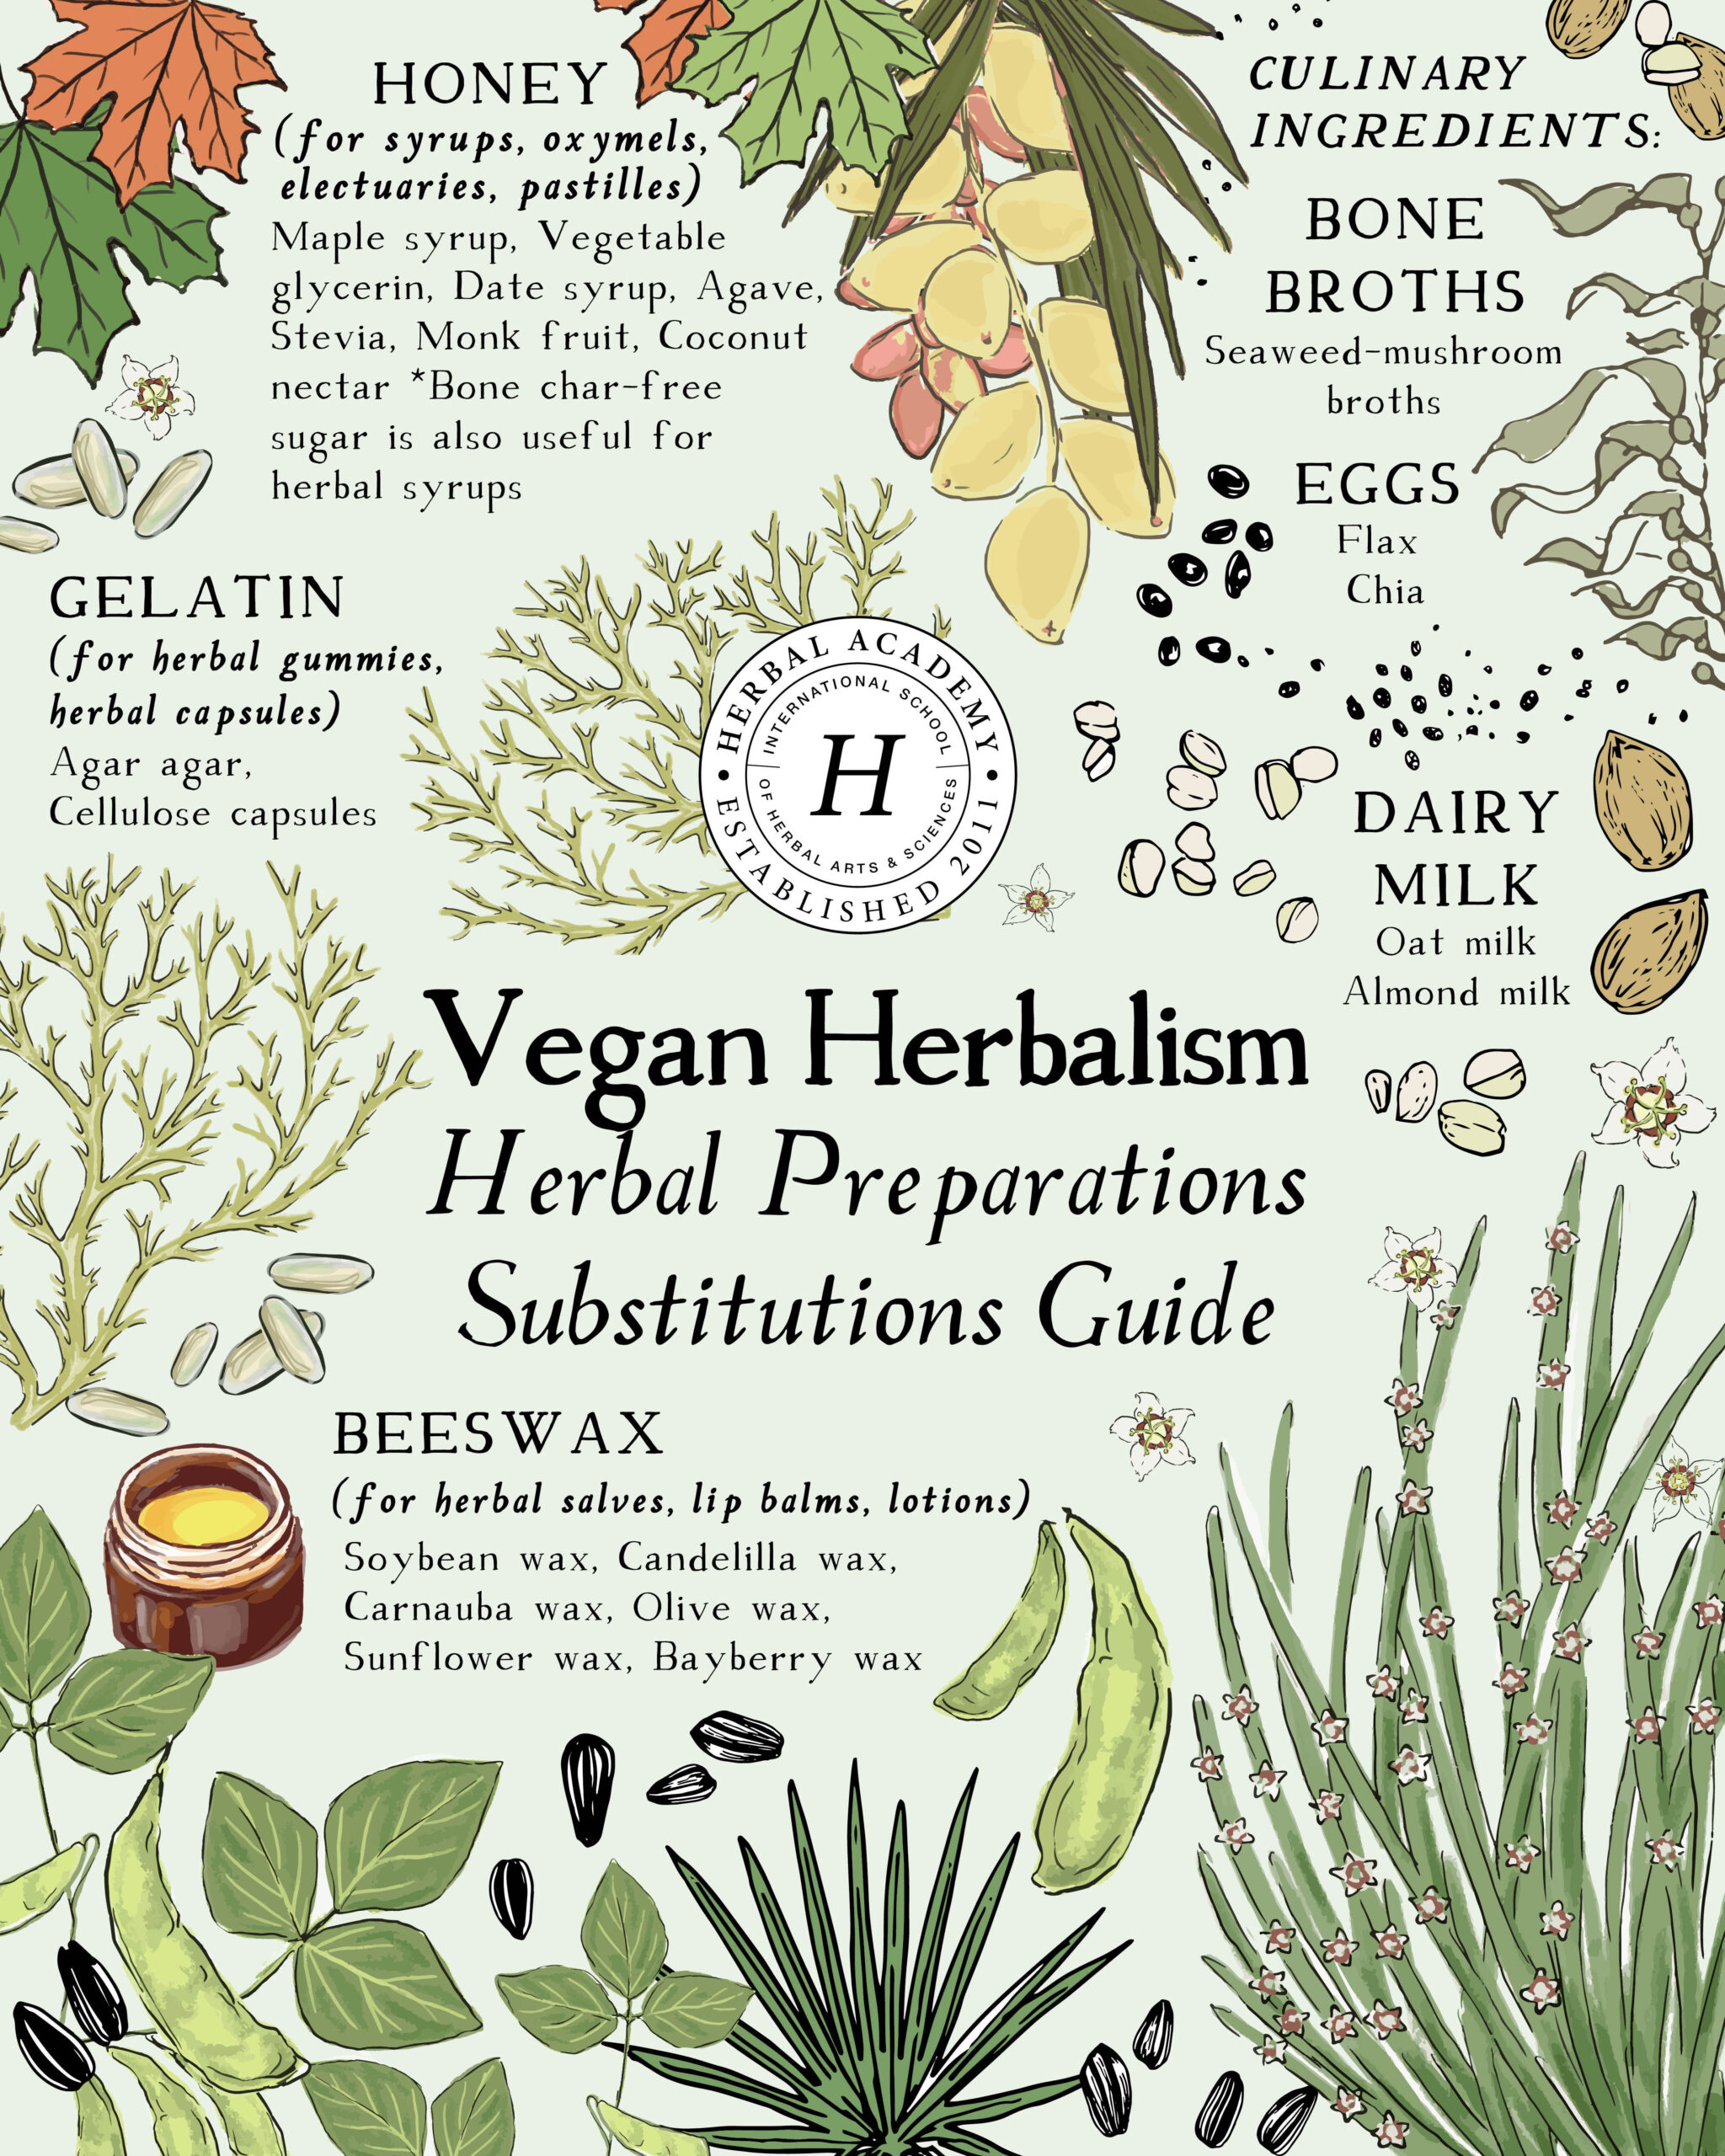 Vegan Herbalism: How to Find Alternatives to Honey, Beeswax, and More | Herbal Academy | For those who adhere to a vegan lifestyle, vegan herbalism means understanding animal-free ingredients to use in common herbal preparations.